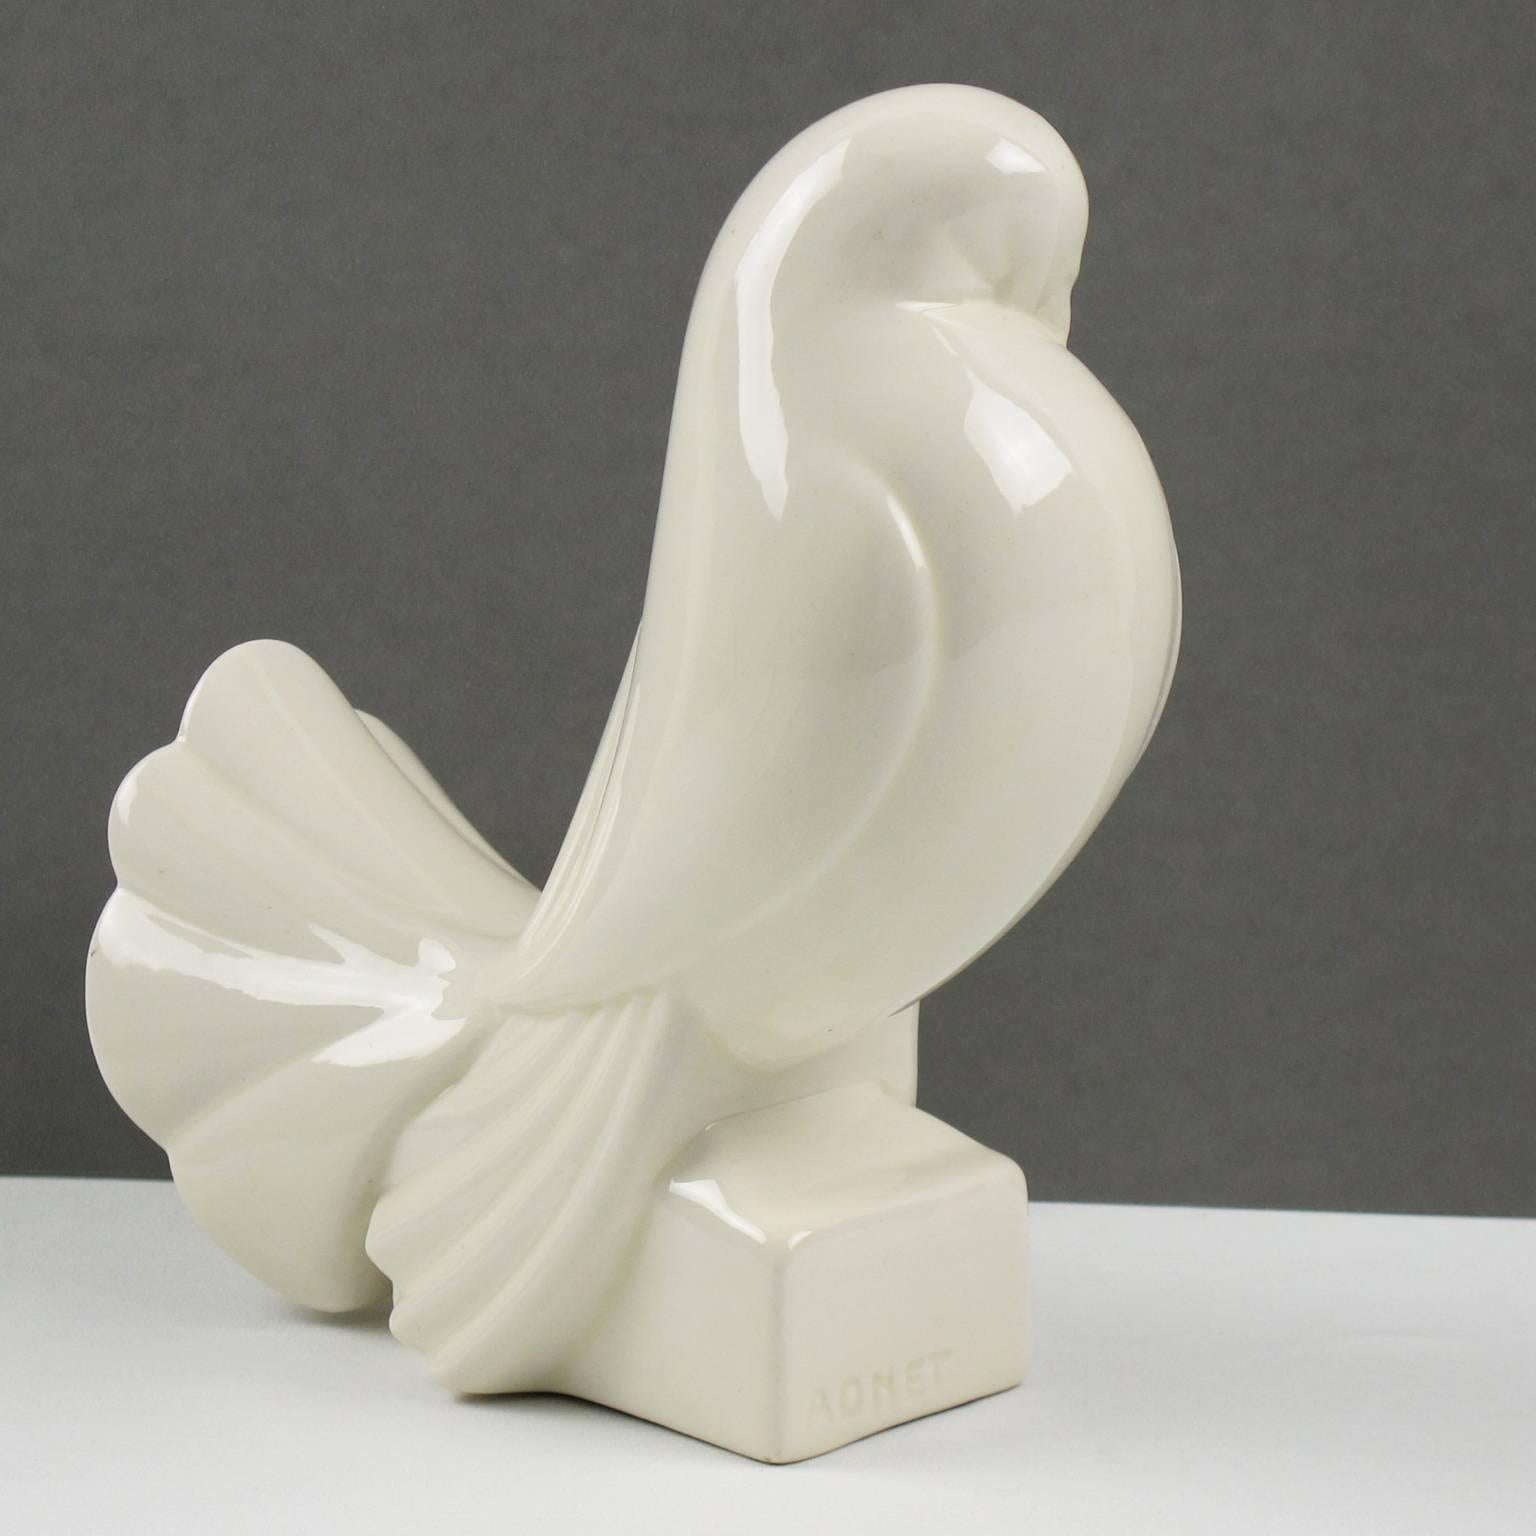 Superb Art Deco bird by Jacques Adnet, France. Iconic off-white colored crackle glaze ceramic or faience sculpture featuring a pigeon or turtledove presented at the 1925 Exposition des Arts Decoratifs et Industriels Modernes in Paris. Marked 